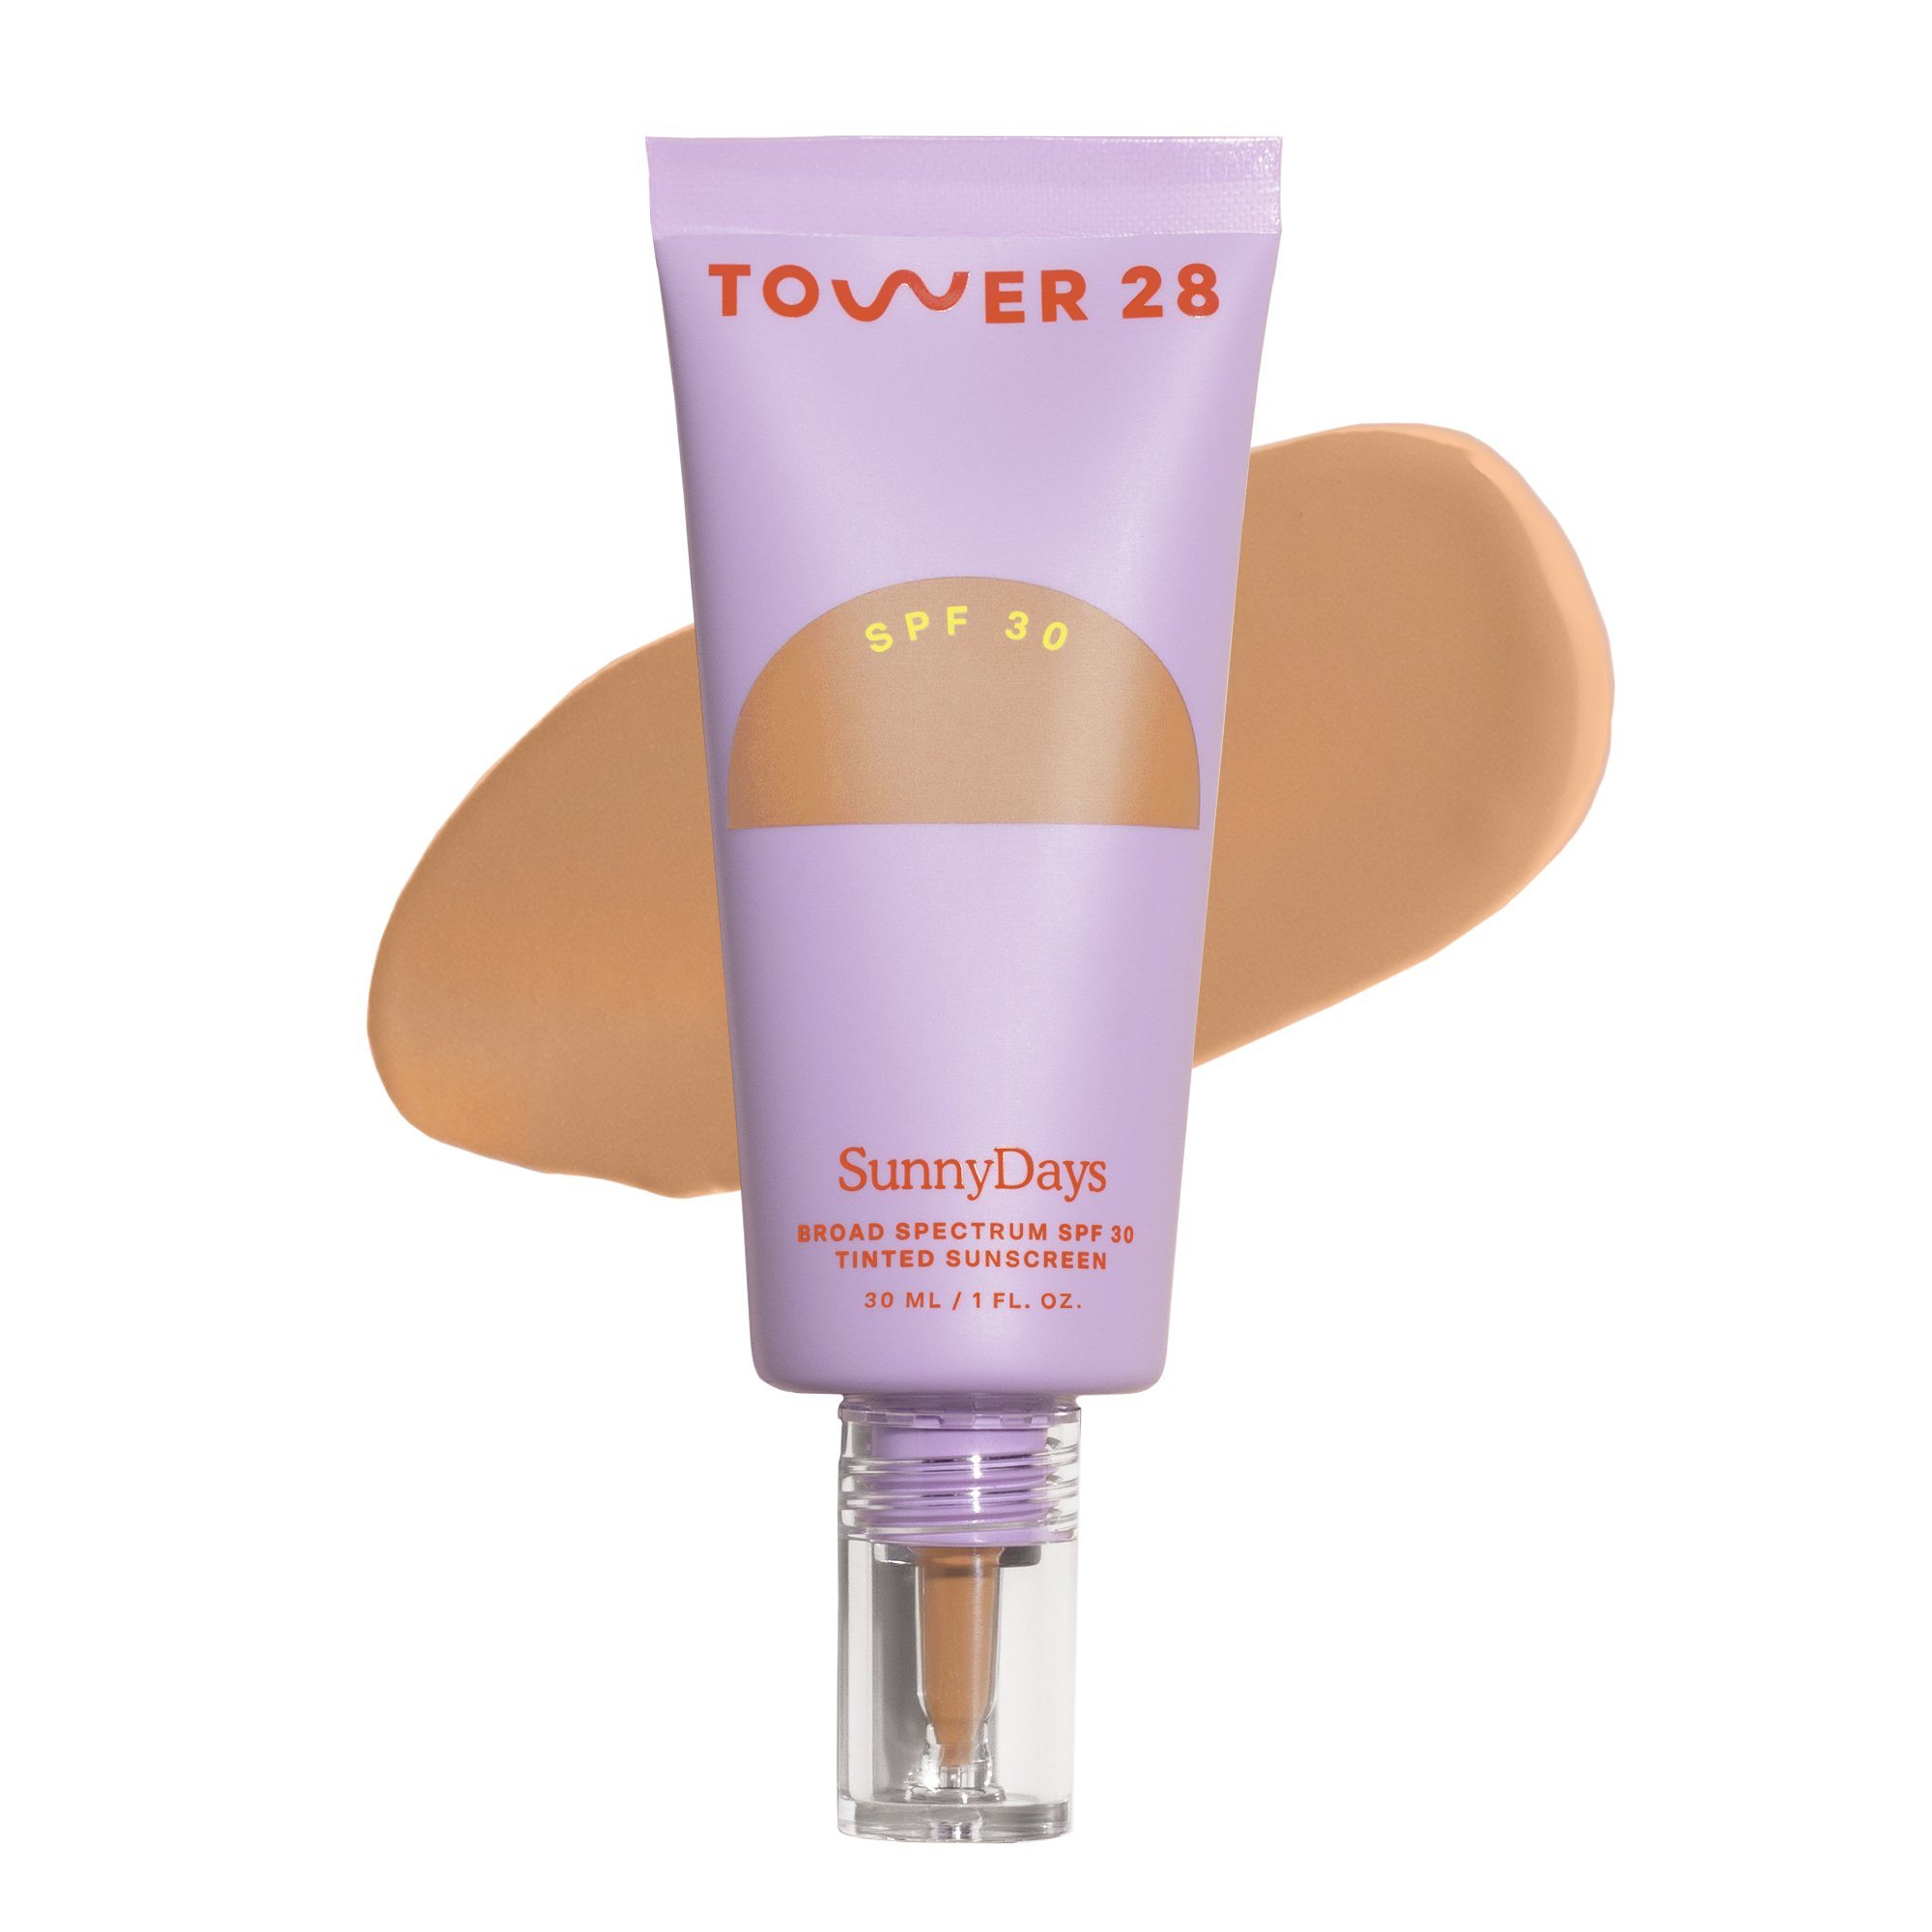 Tower 28 SunnyDays Tinted SPF Sunscreen Foundation, credo friends and family sale